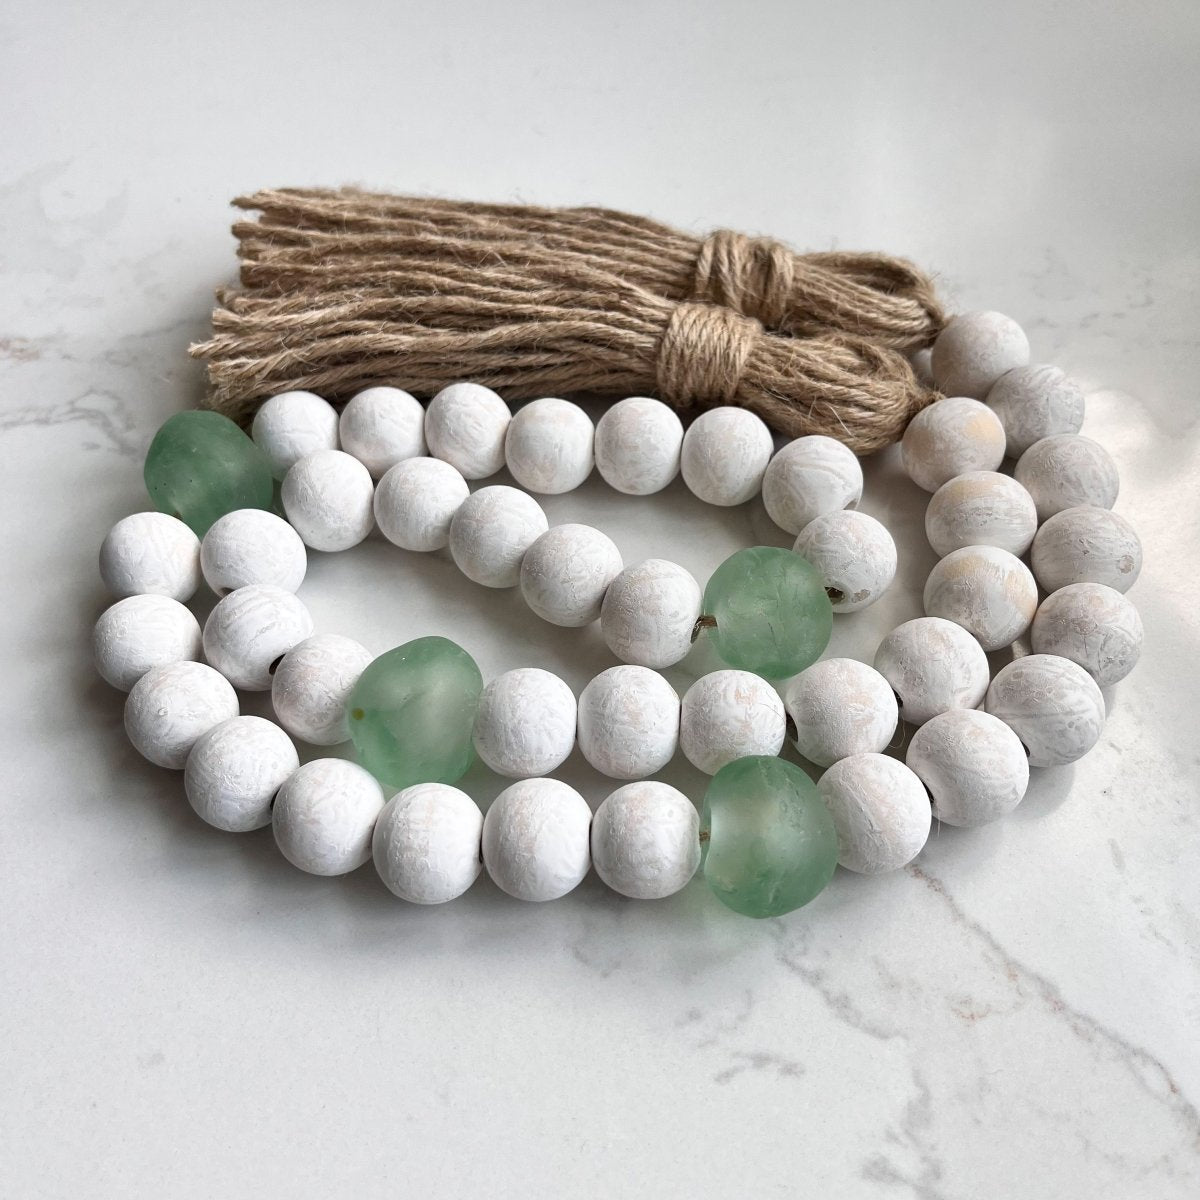 Load image into Gallery viewer, Whitewashed Wood Bead Garland with Jumbo Green/Aqua Recycled Glass Beads - sonder and wolf
